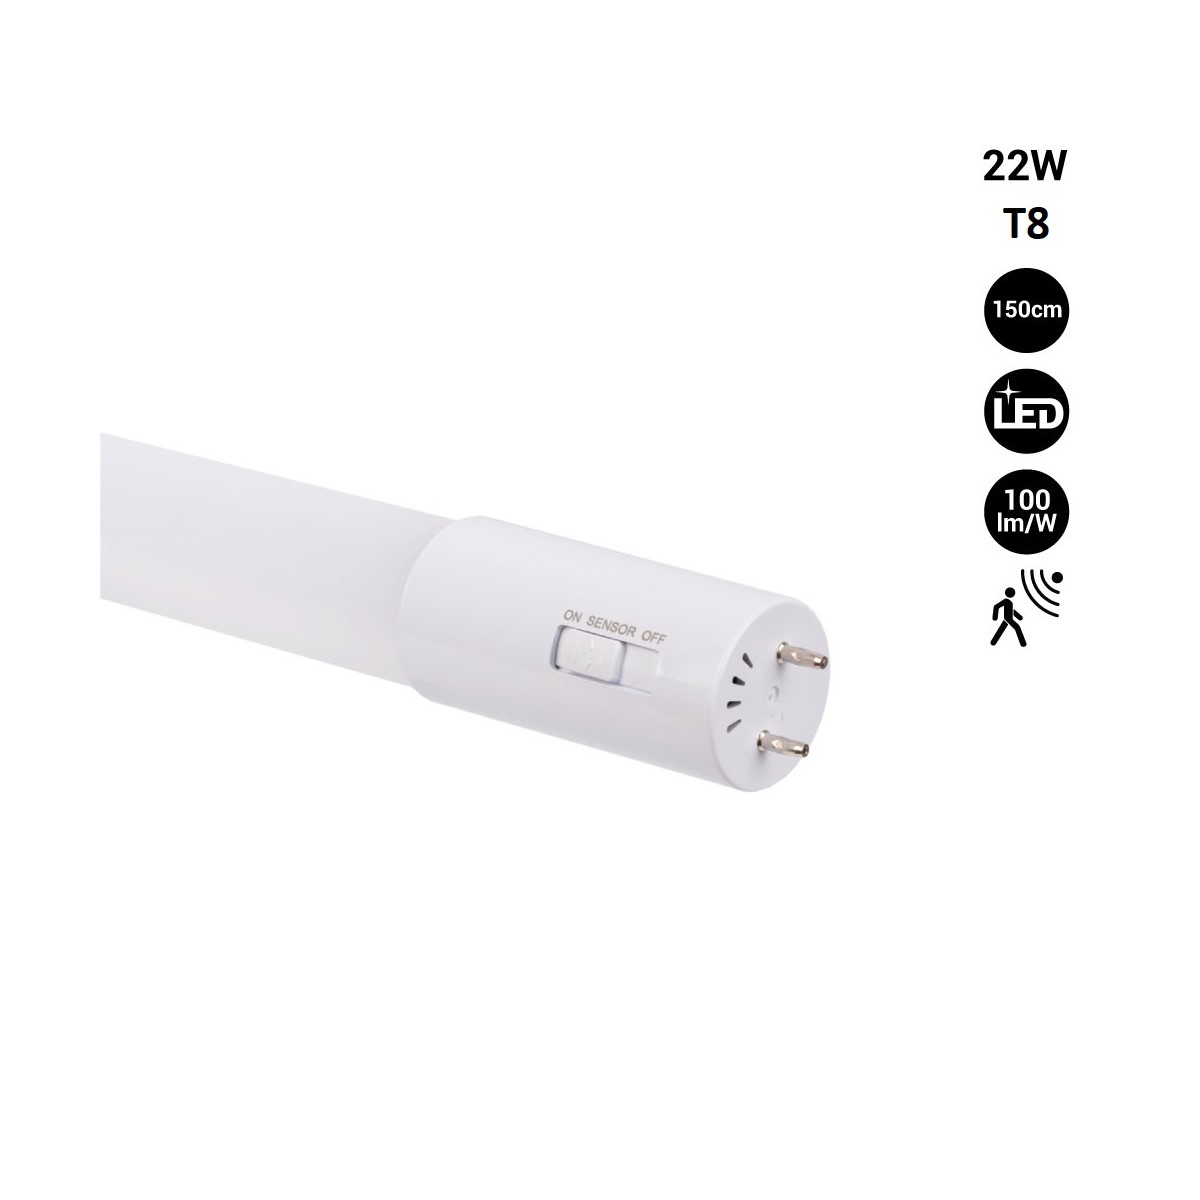 LED tube 150cm T8 with motion detector microwave - 22W - 100lm/w - 6000K